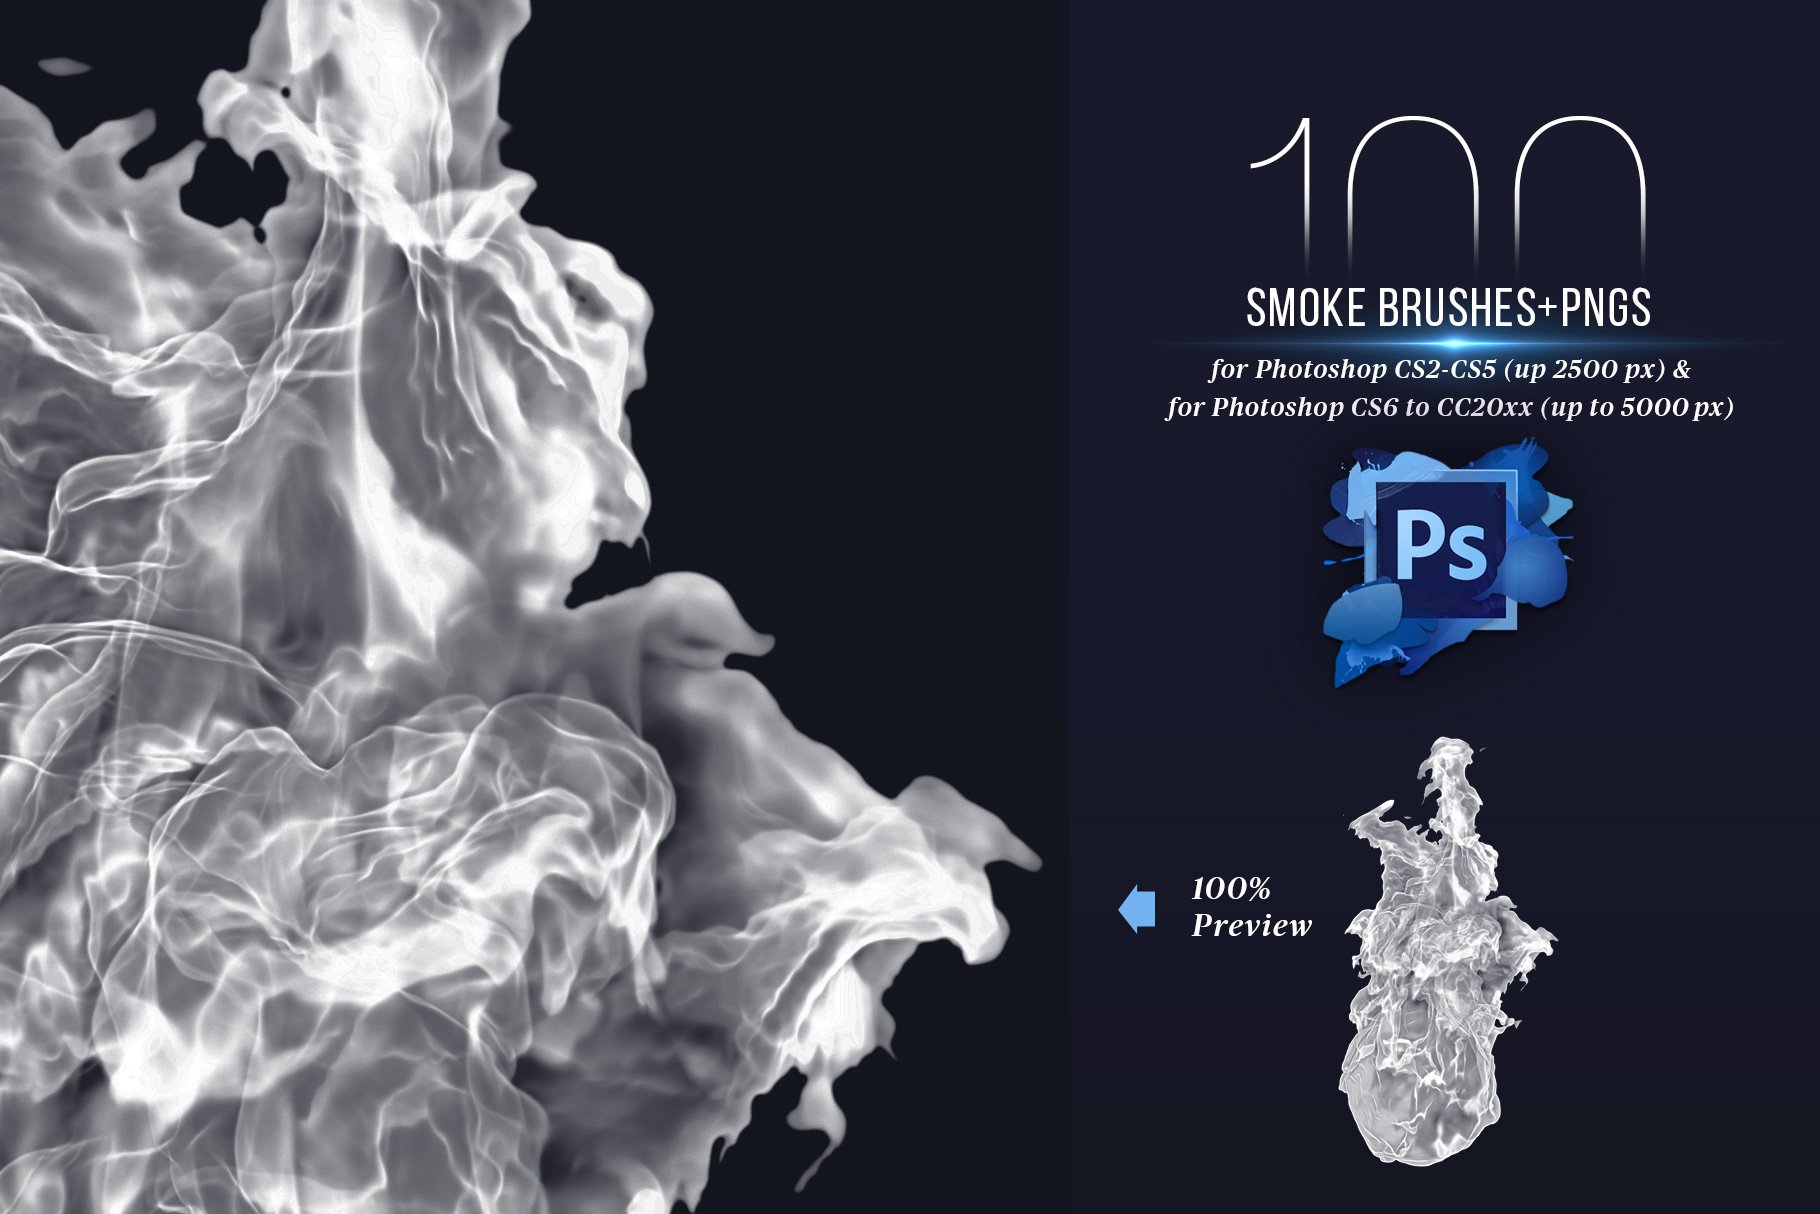 100 Photoshop Smoke Brushes + PNGspreview image.